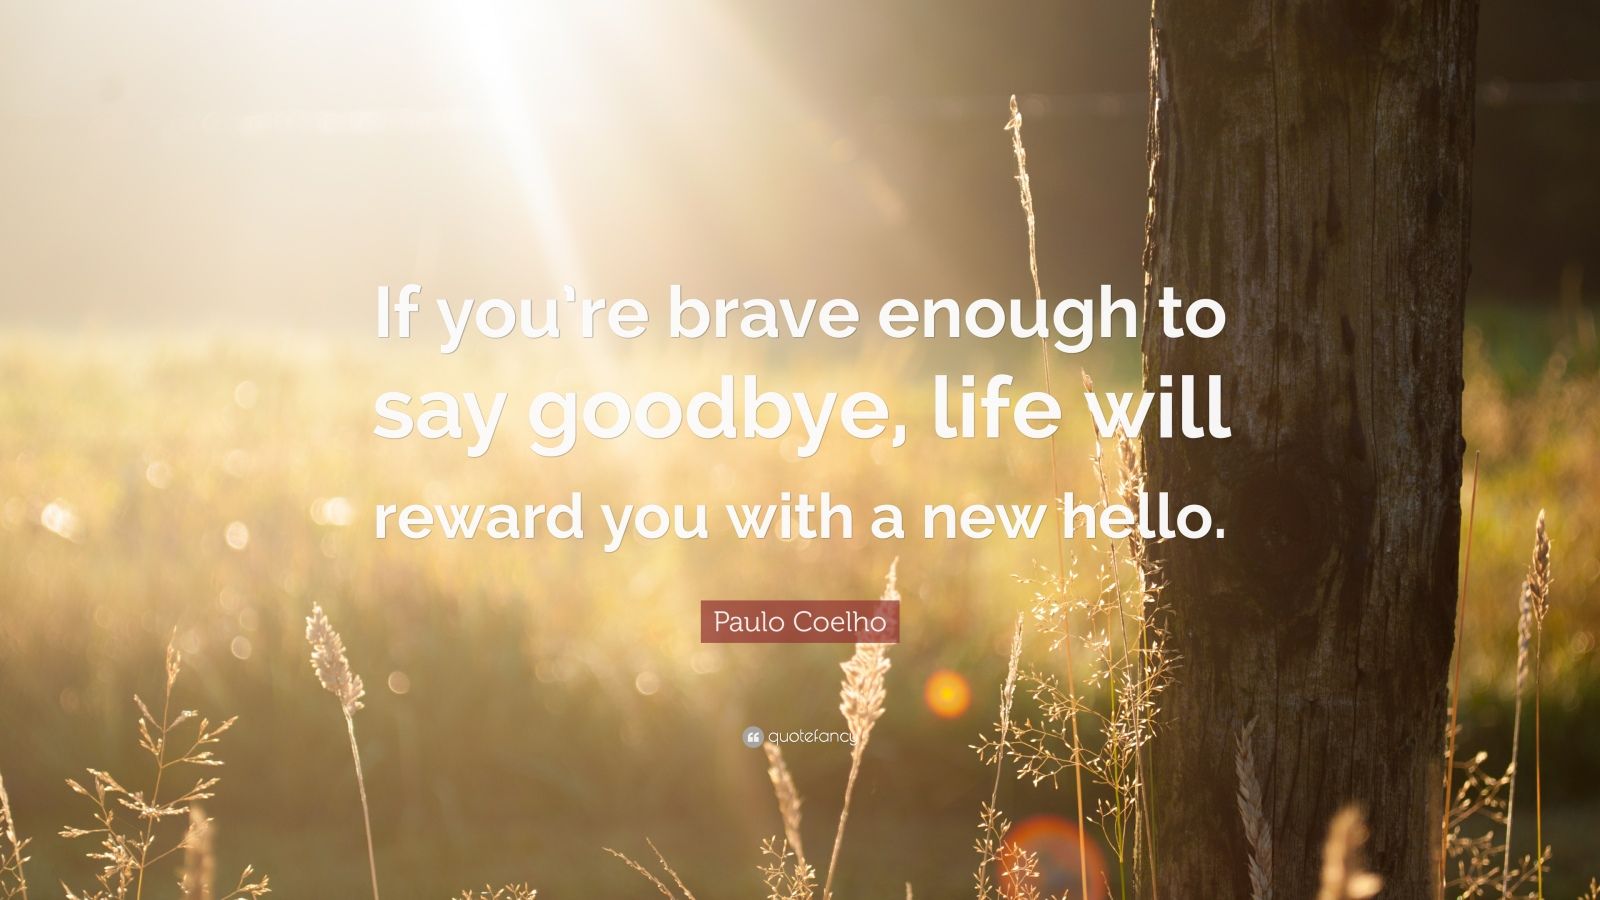 Paulo Coelho Quote: “If you’re brave enough to say goodbye, life will ...